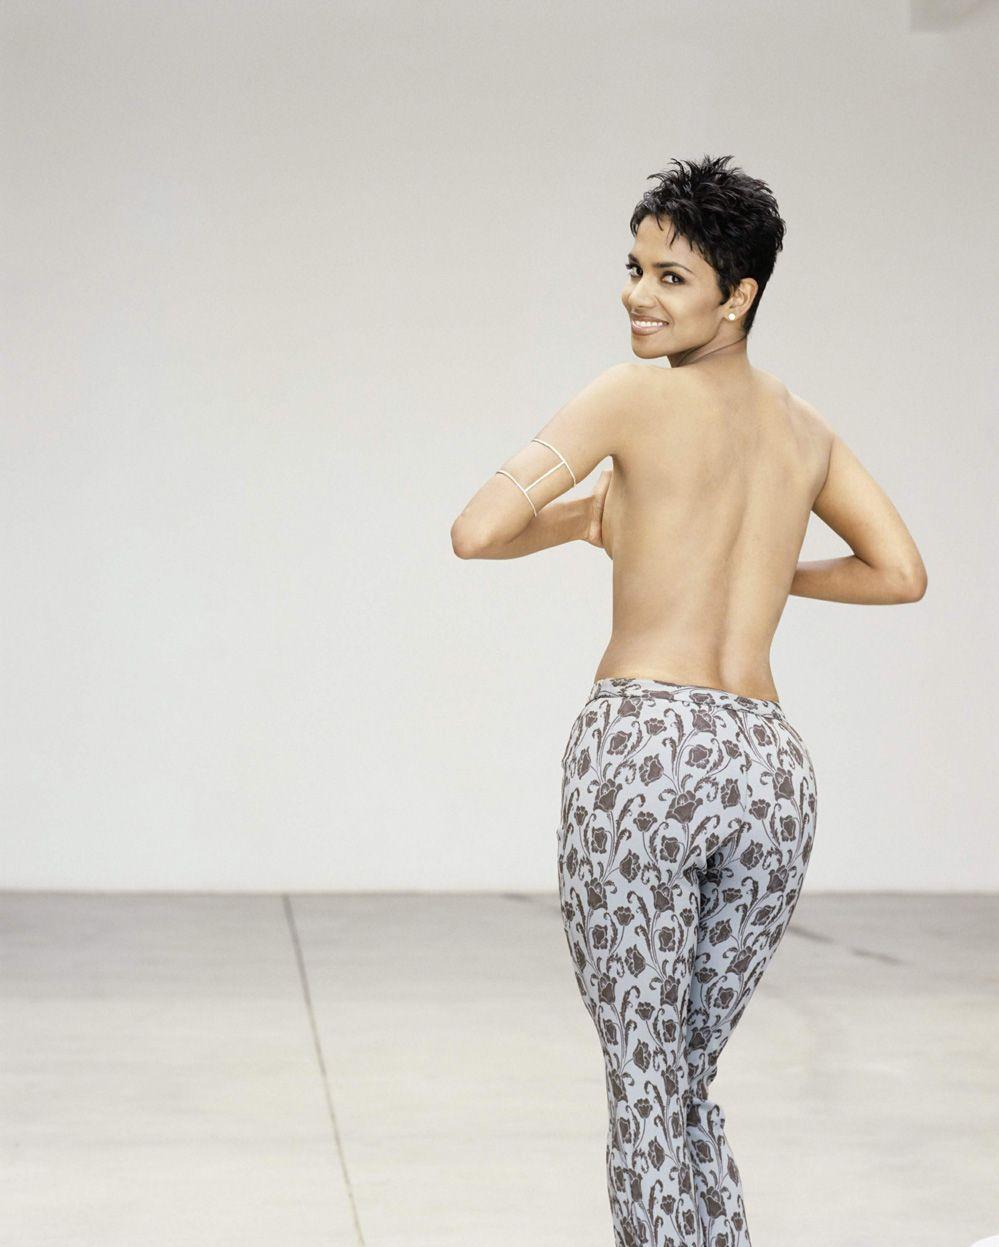 49 Hottest Halle Berry Bikini Pictures Will Rock Your World | Best Of Comic Books